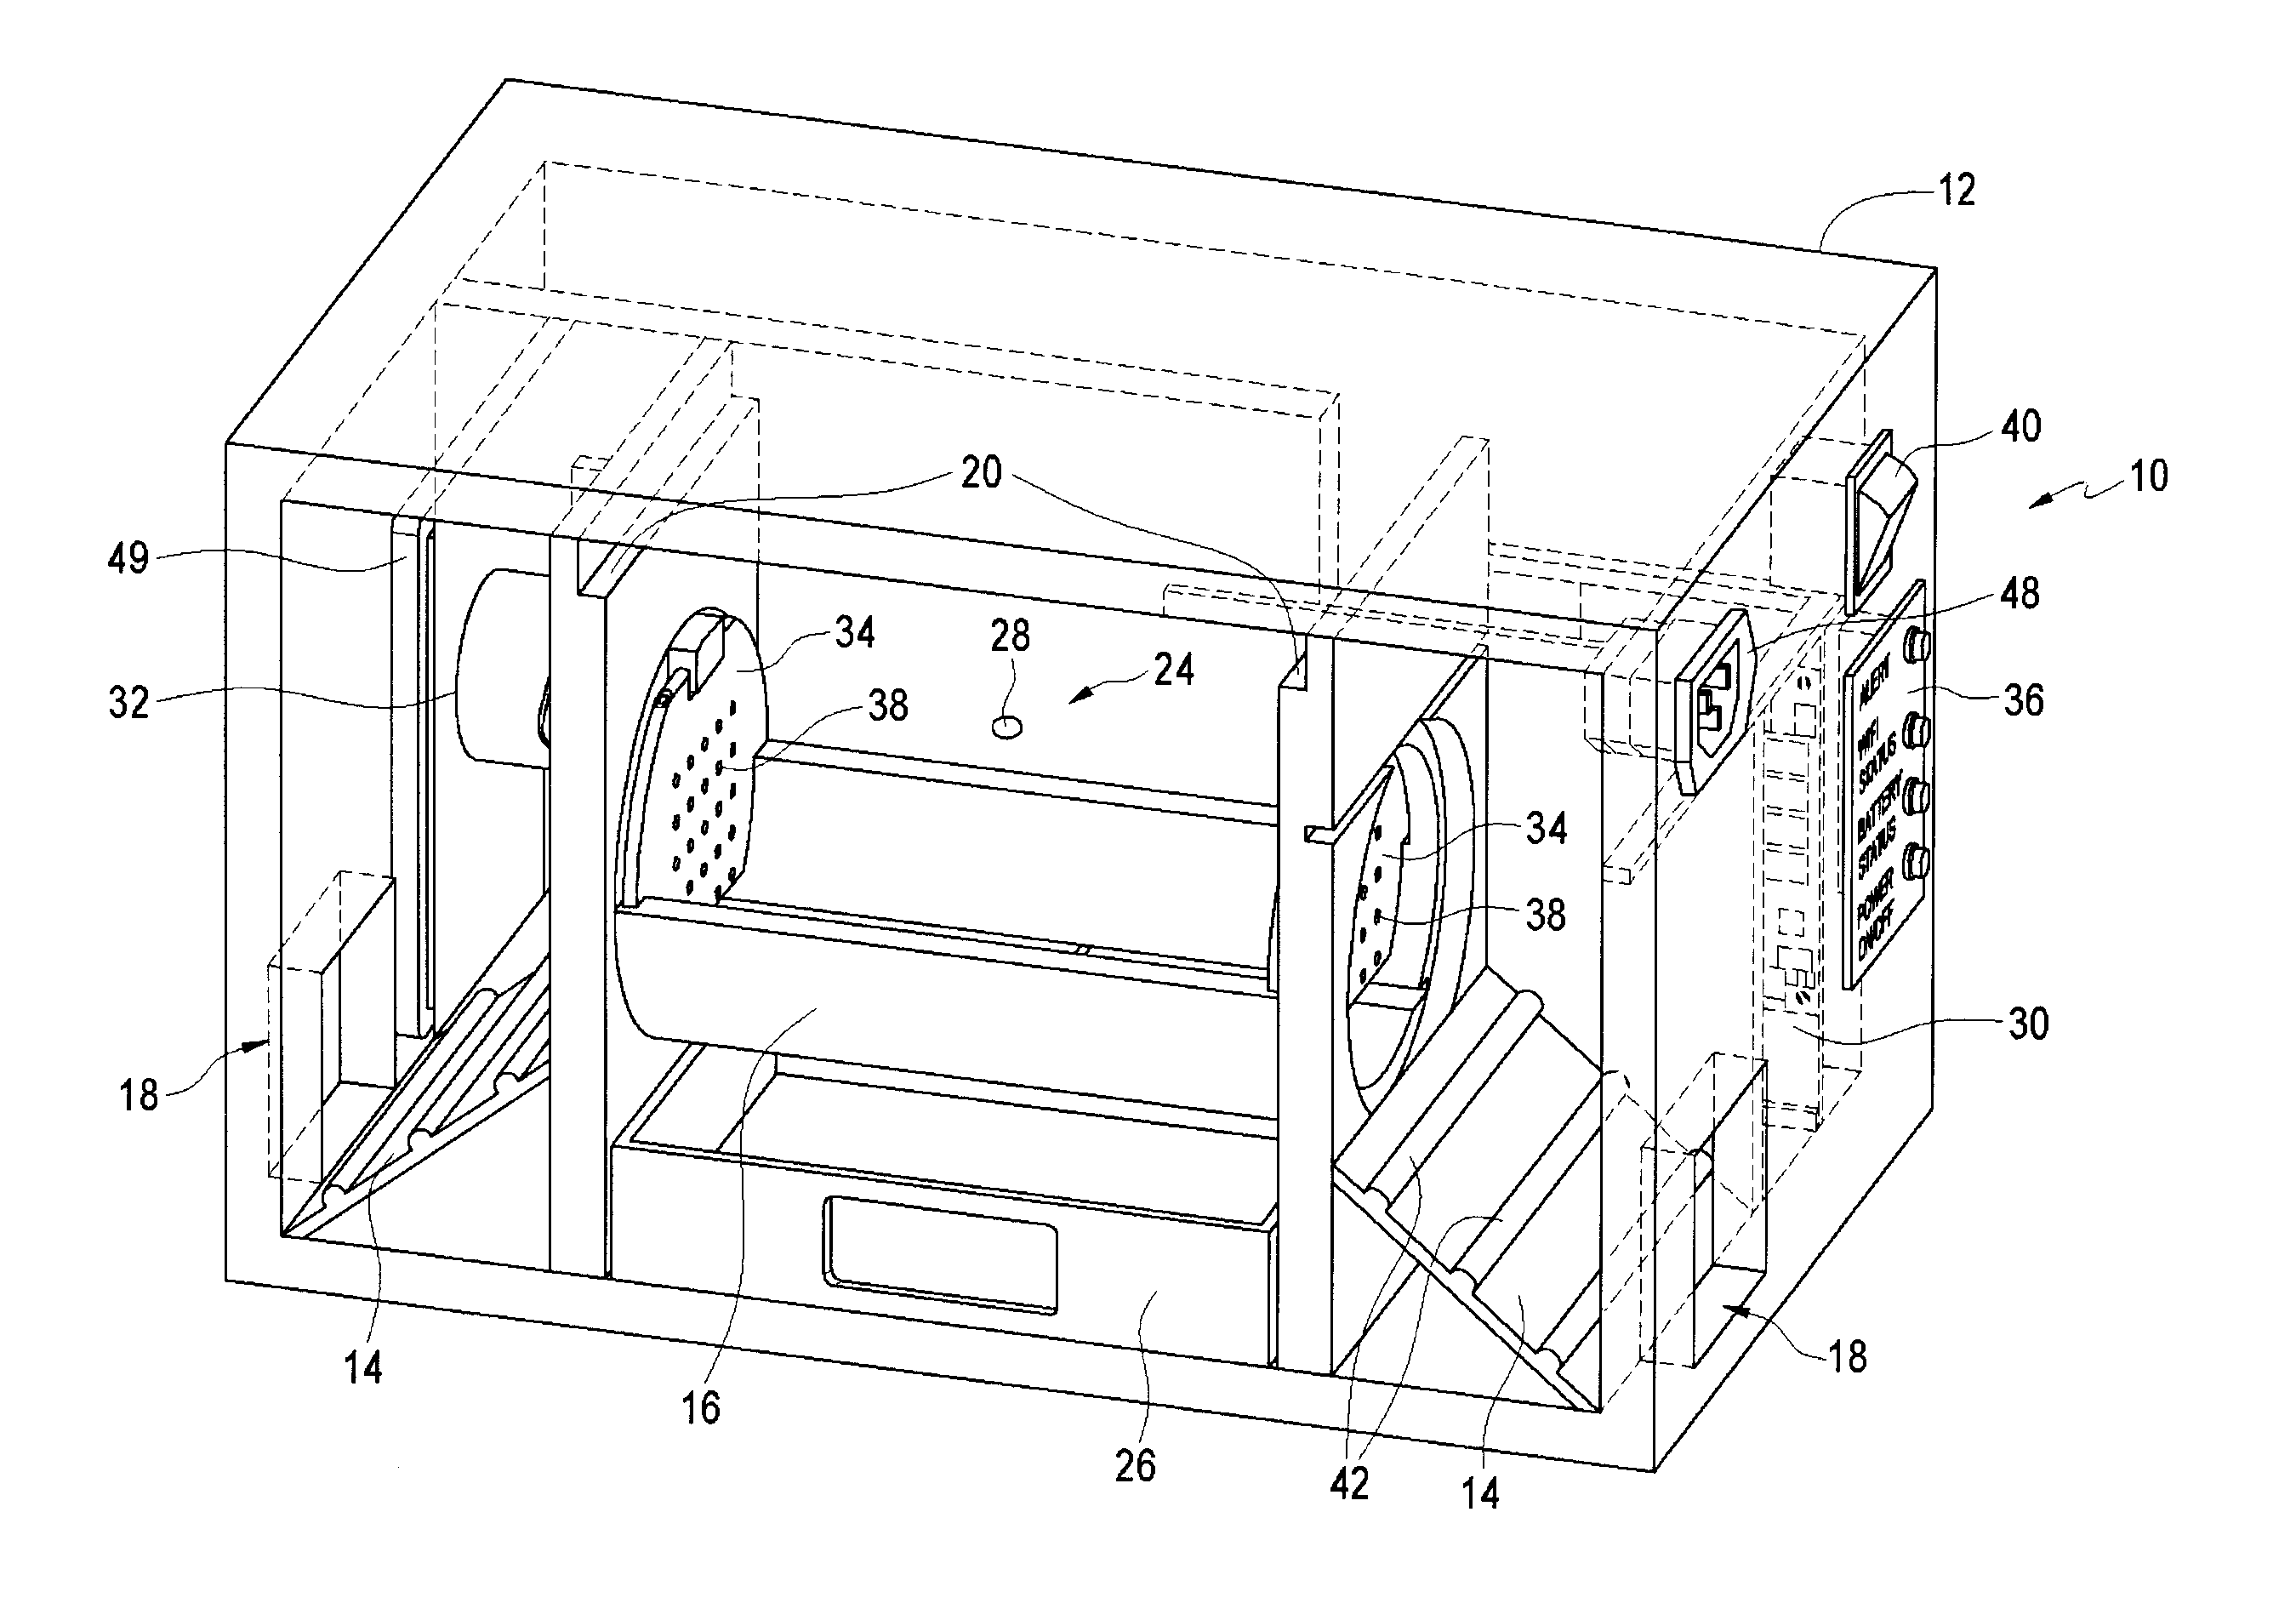 Multiple-use vermin trap apparatus, method and system